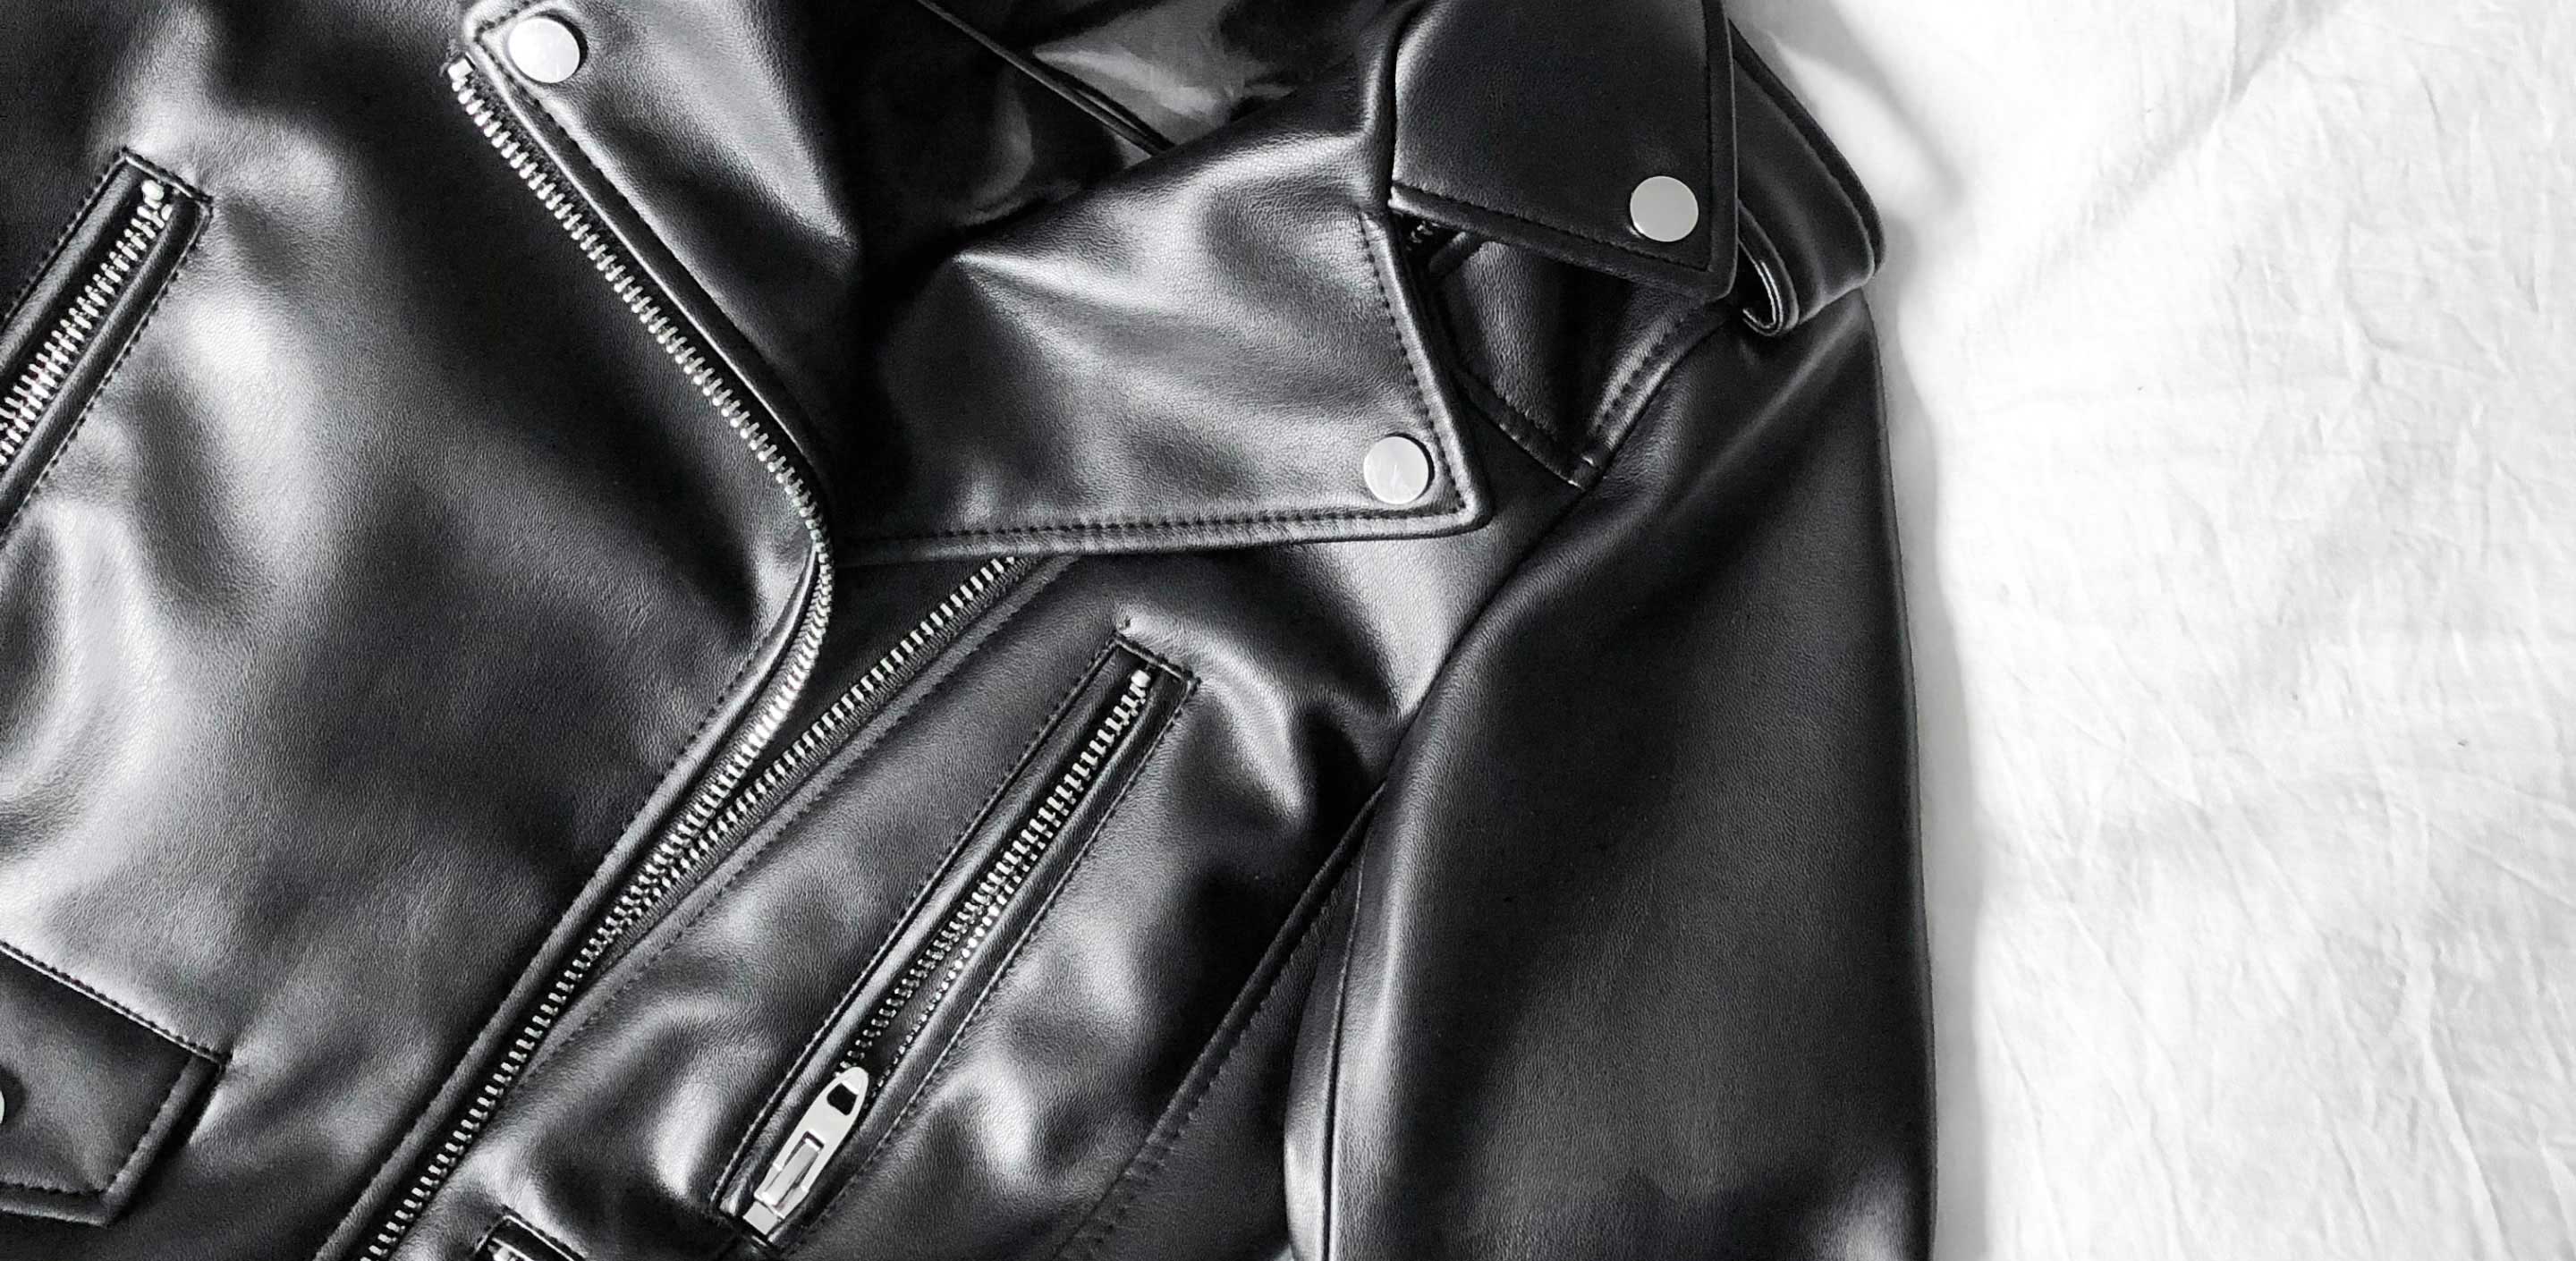 Are expensive leather jackets worth it?